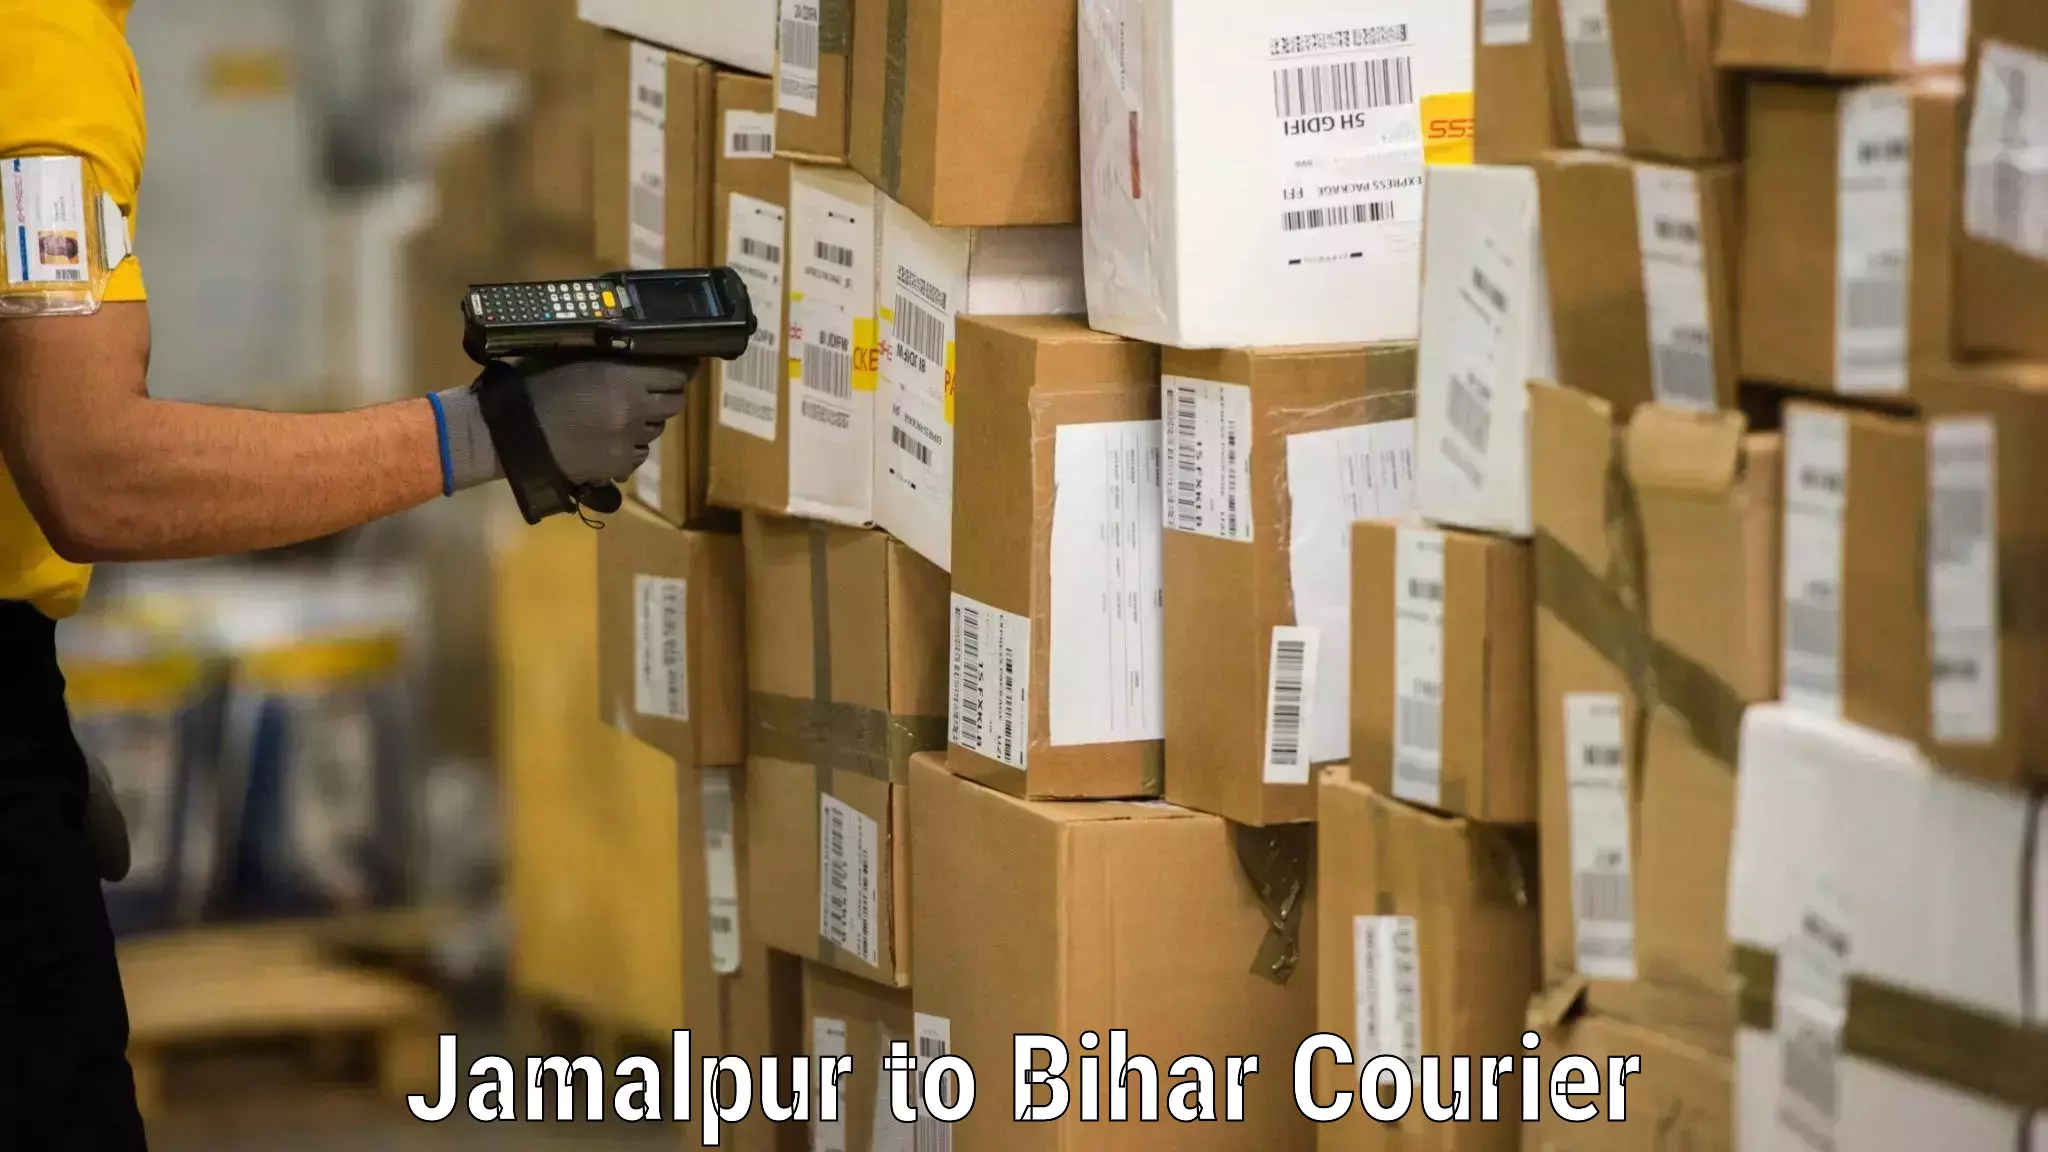 Moving and packing experts Jamalpur to Bihar